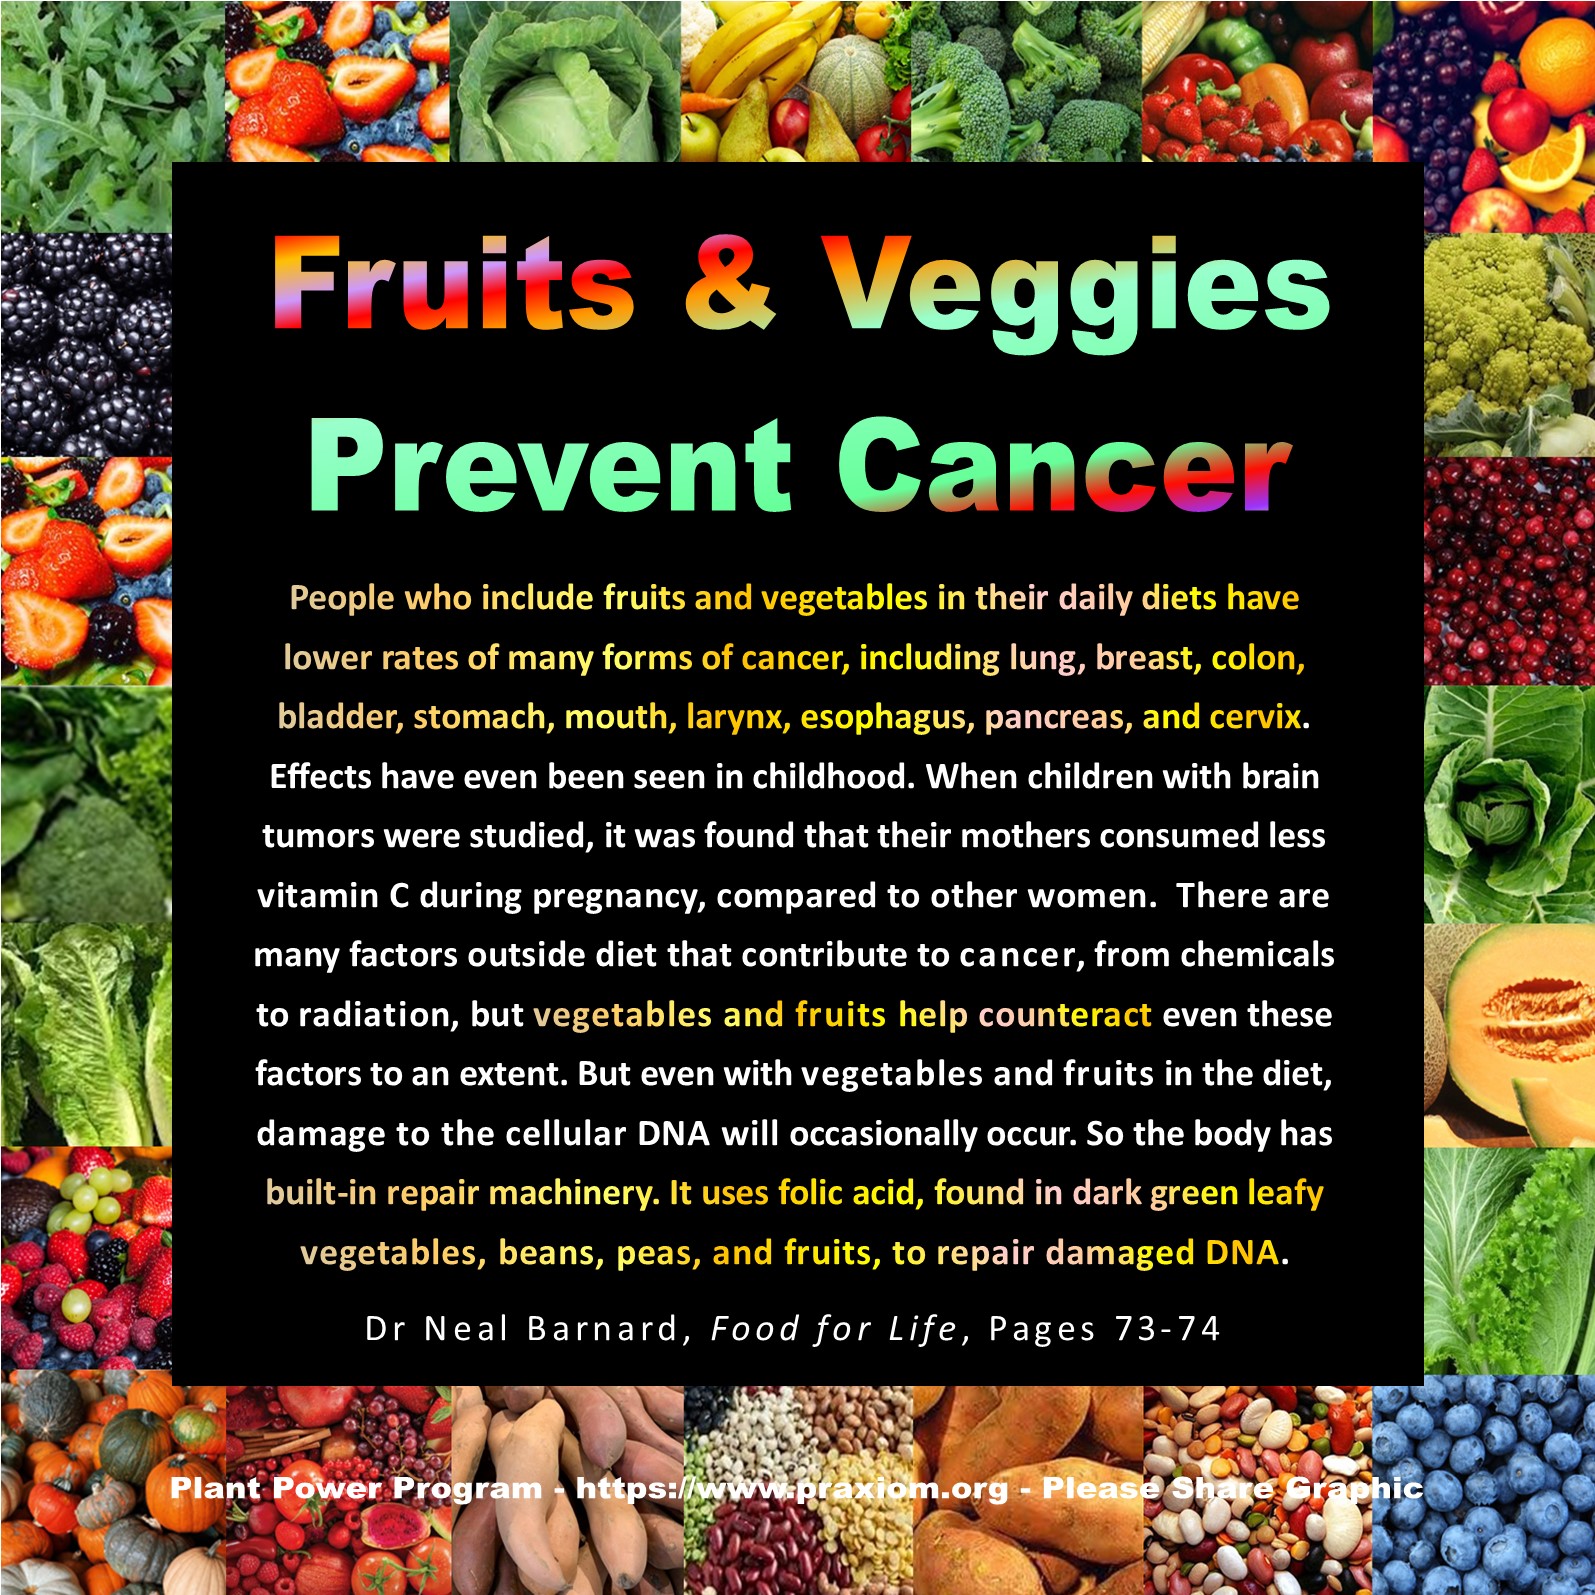 Fruits and Veggies Can Prevent Cancer - Dr. Neal Barnard